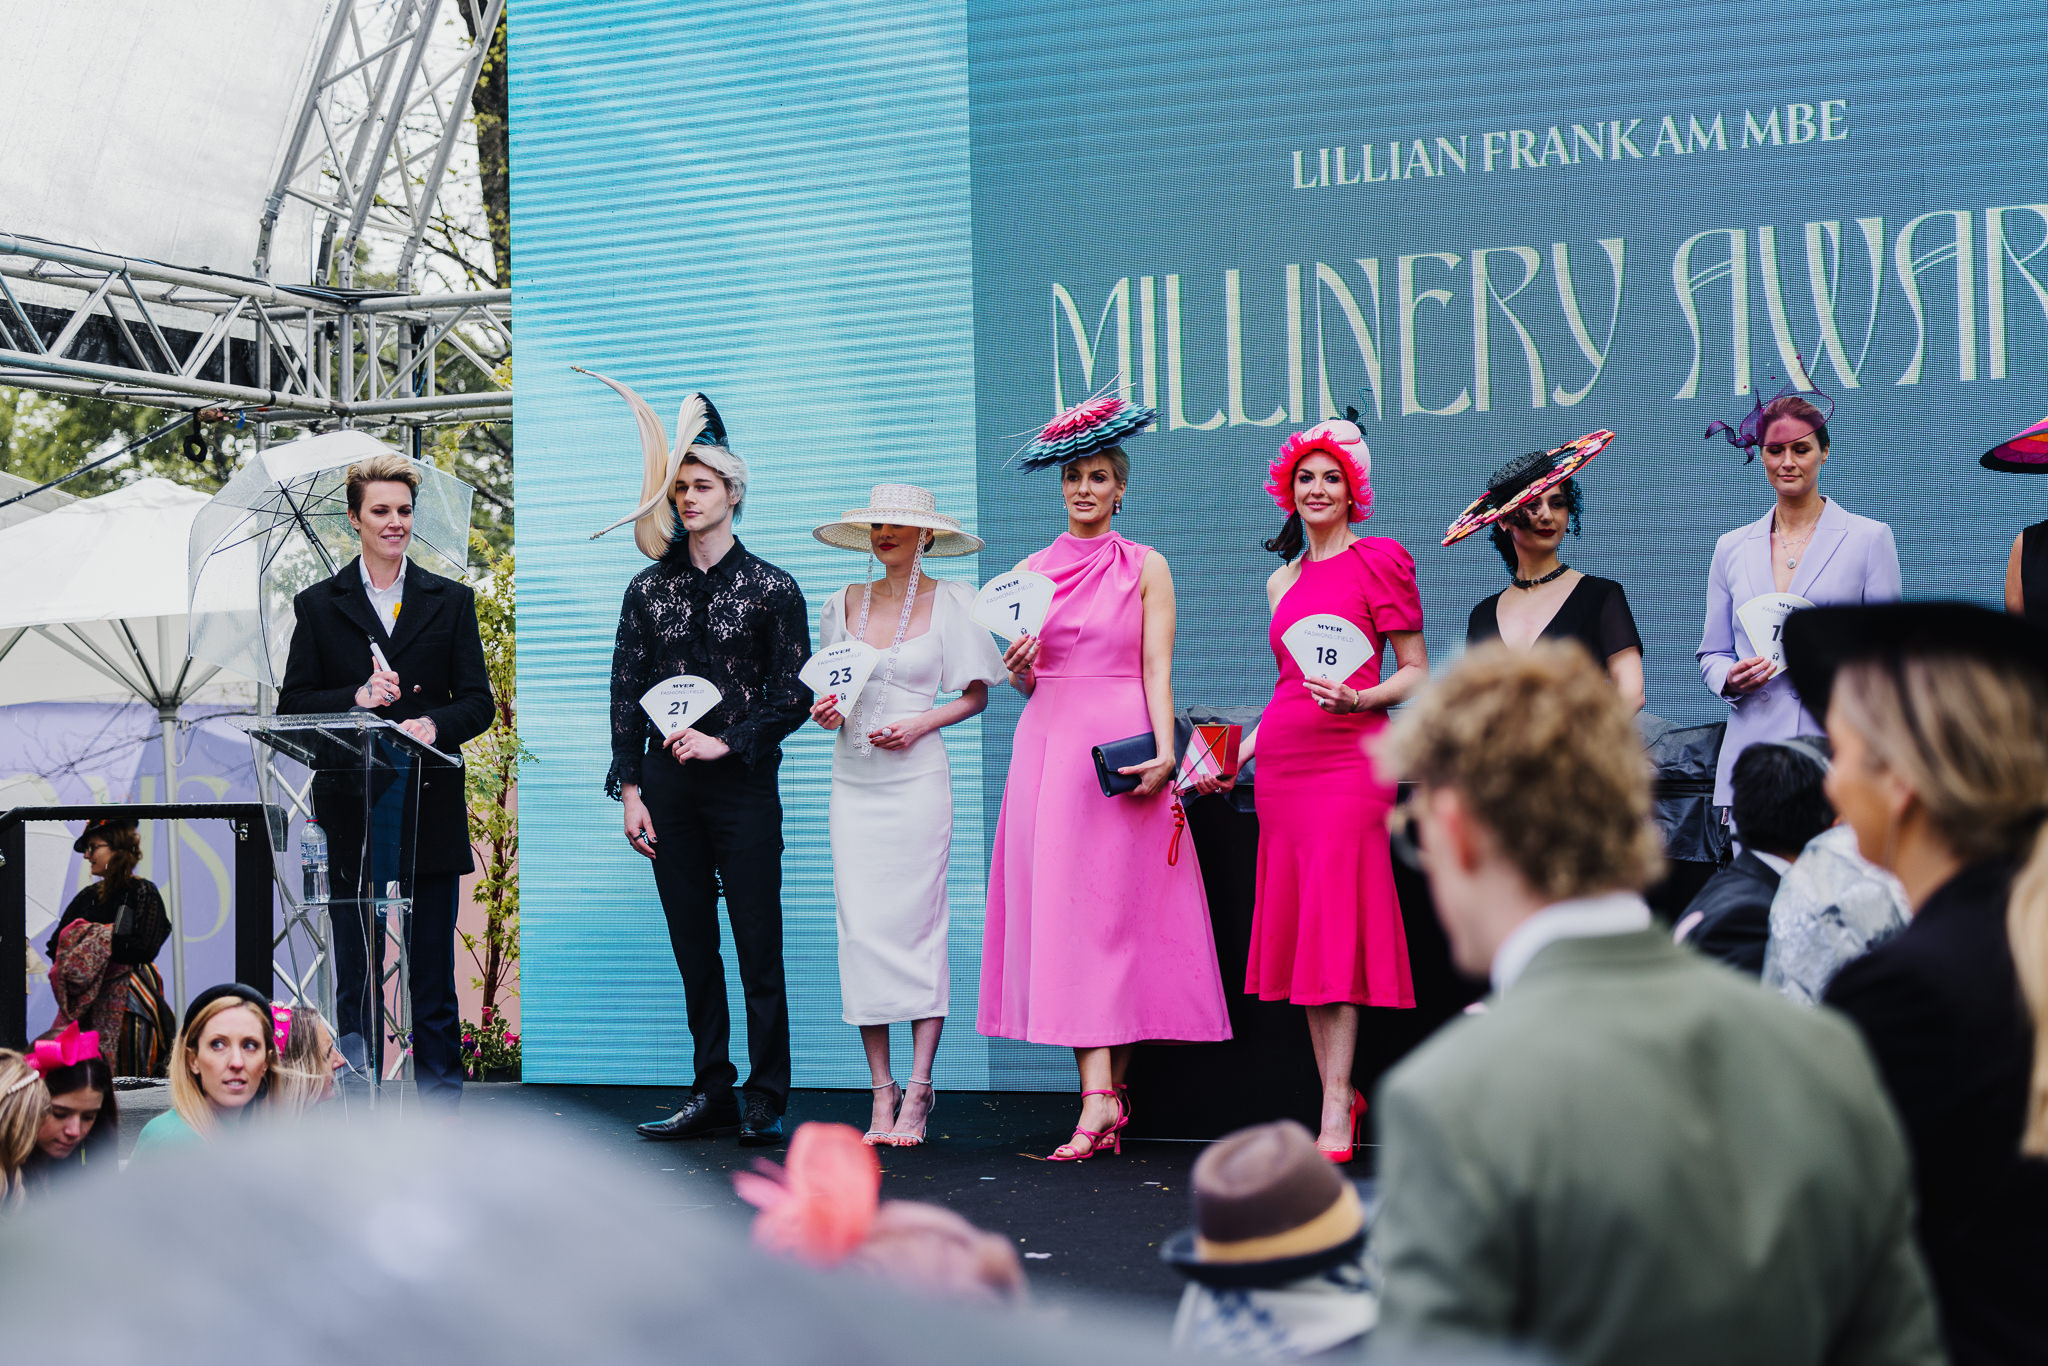 Millinery Award 2022 at Melbourne Cup - Lillian Frank Millinery Award 